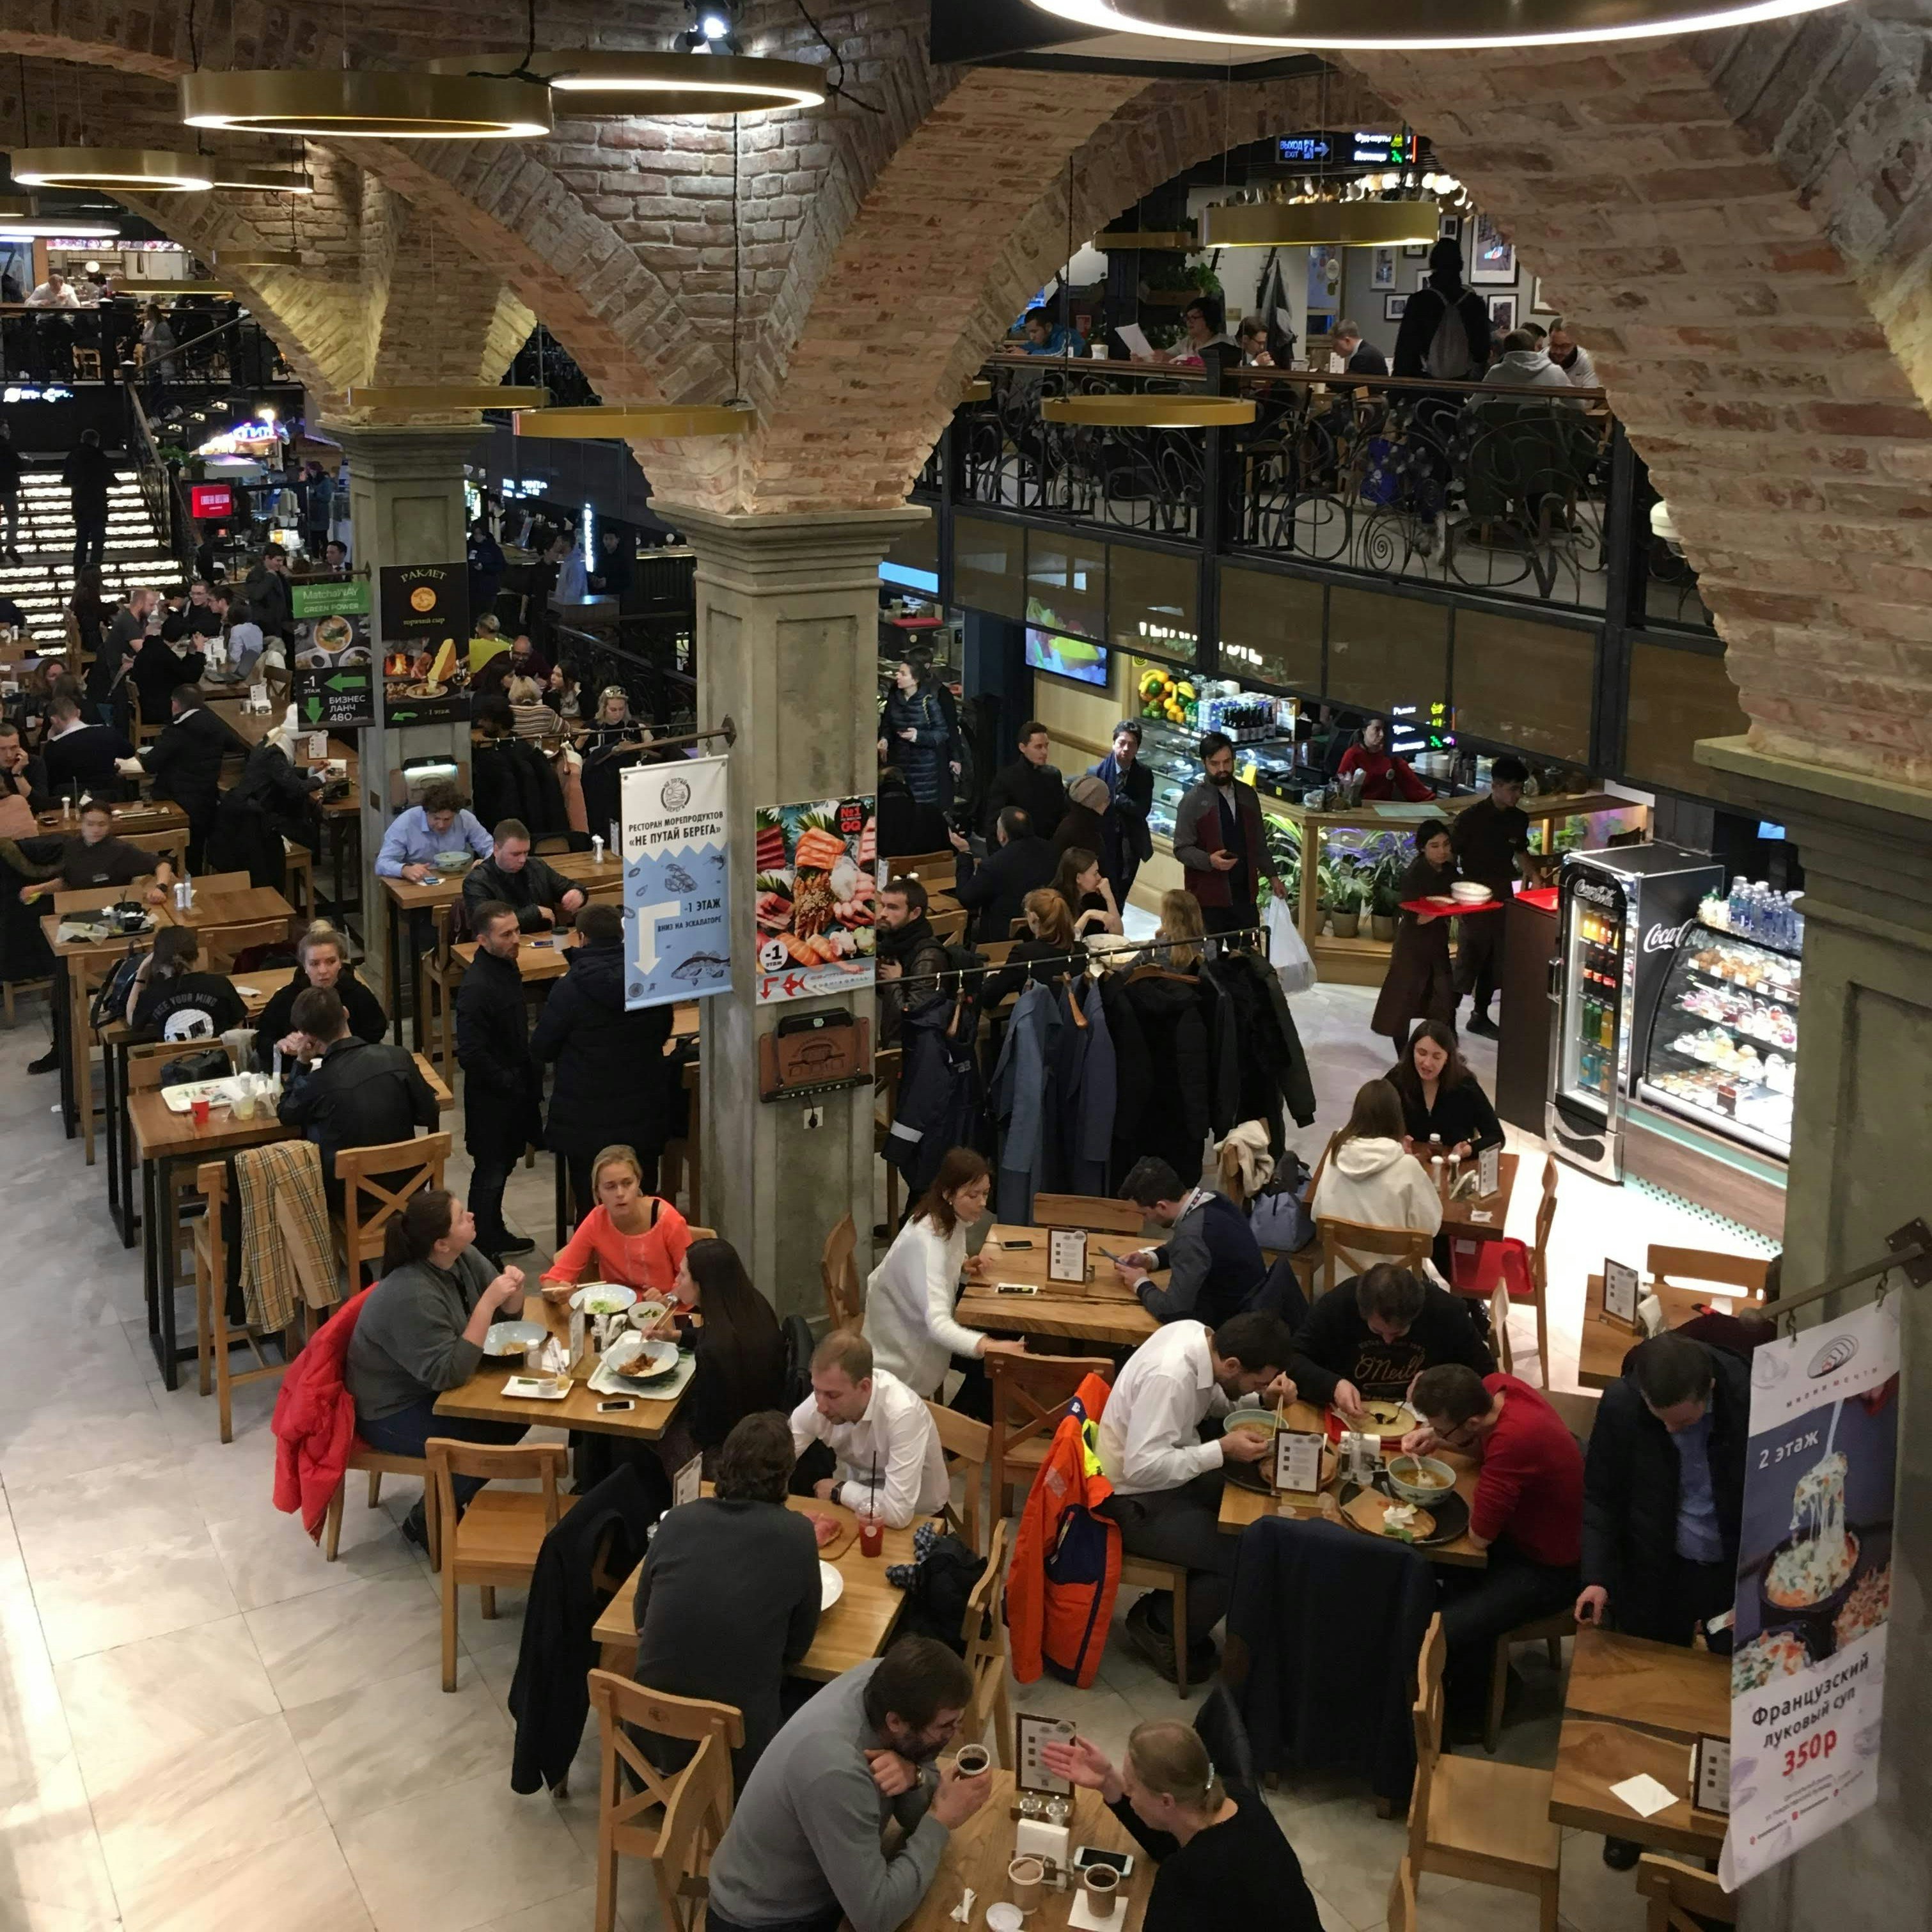 A view from above of diners seated at tables in a food market